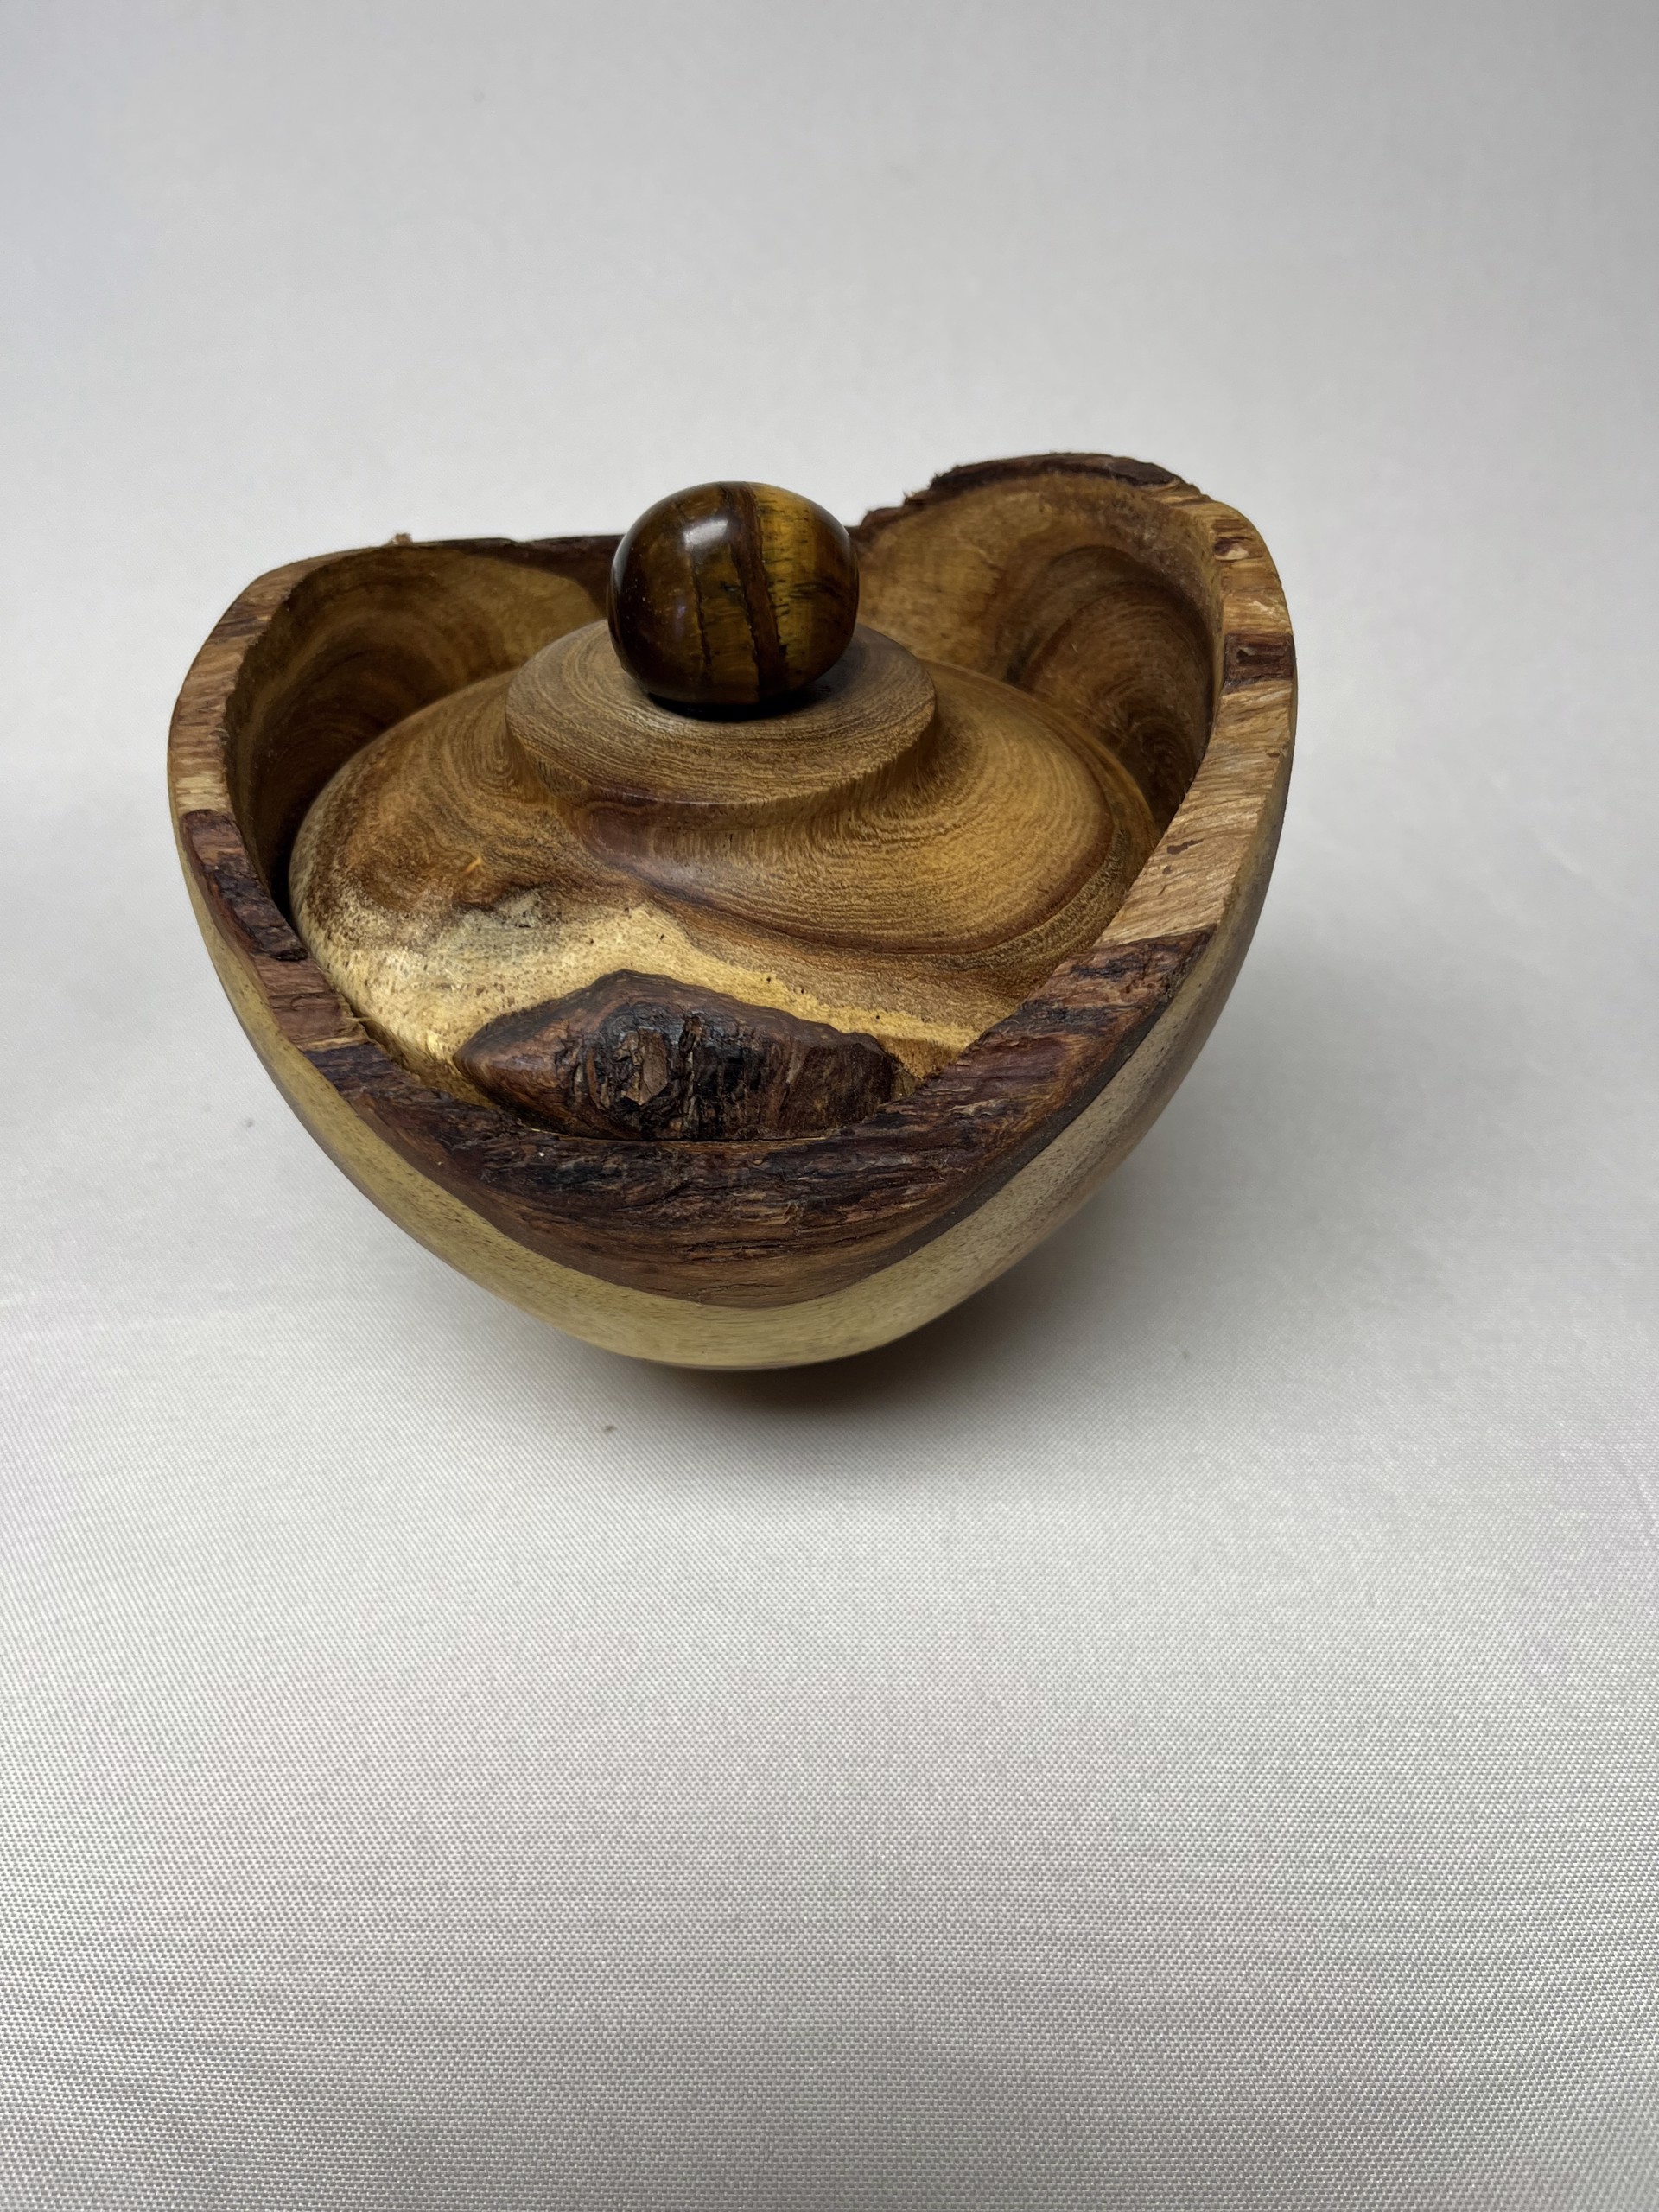 Turned Wood Jar W/Lid #23-25 by Rick Squires